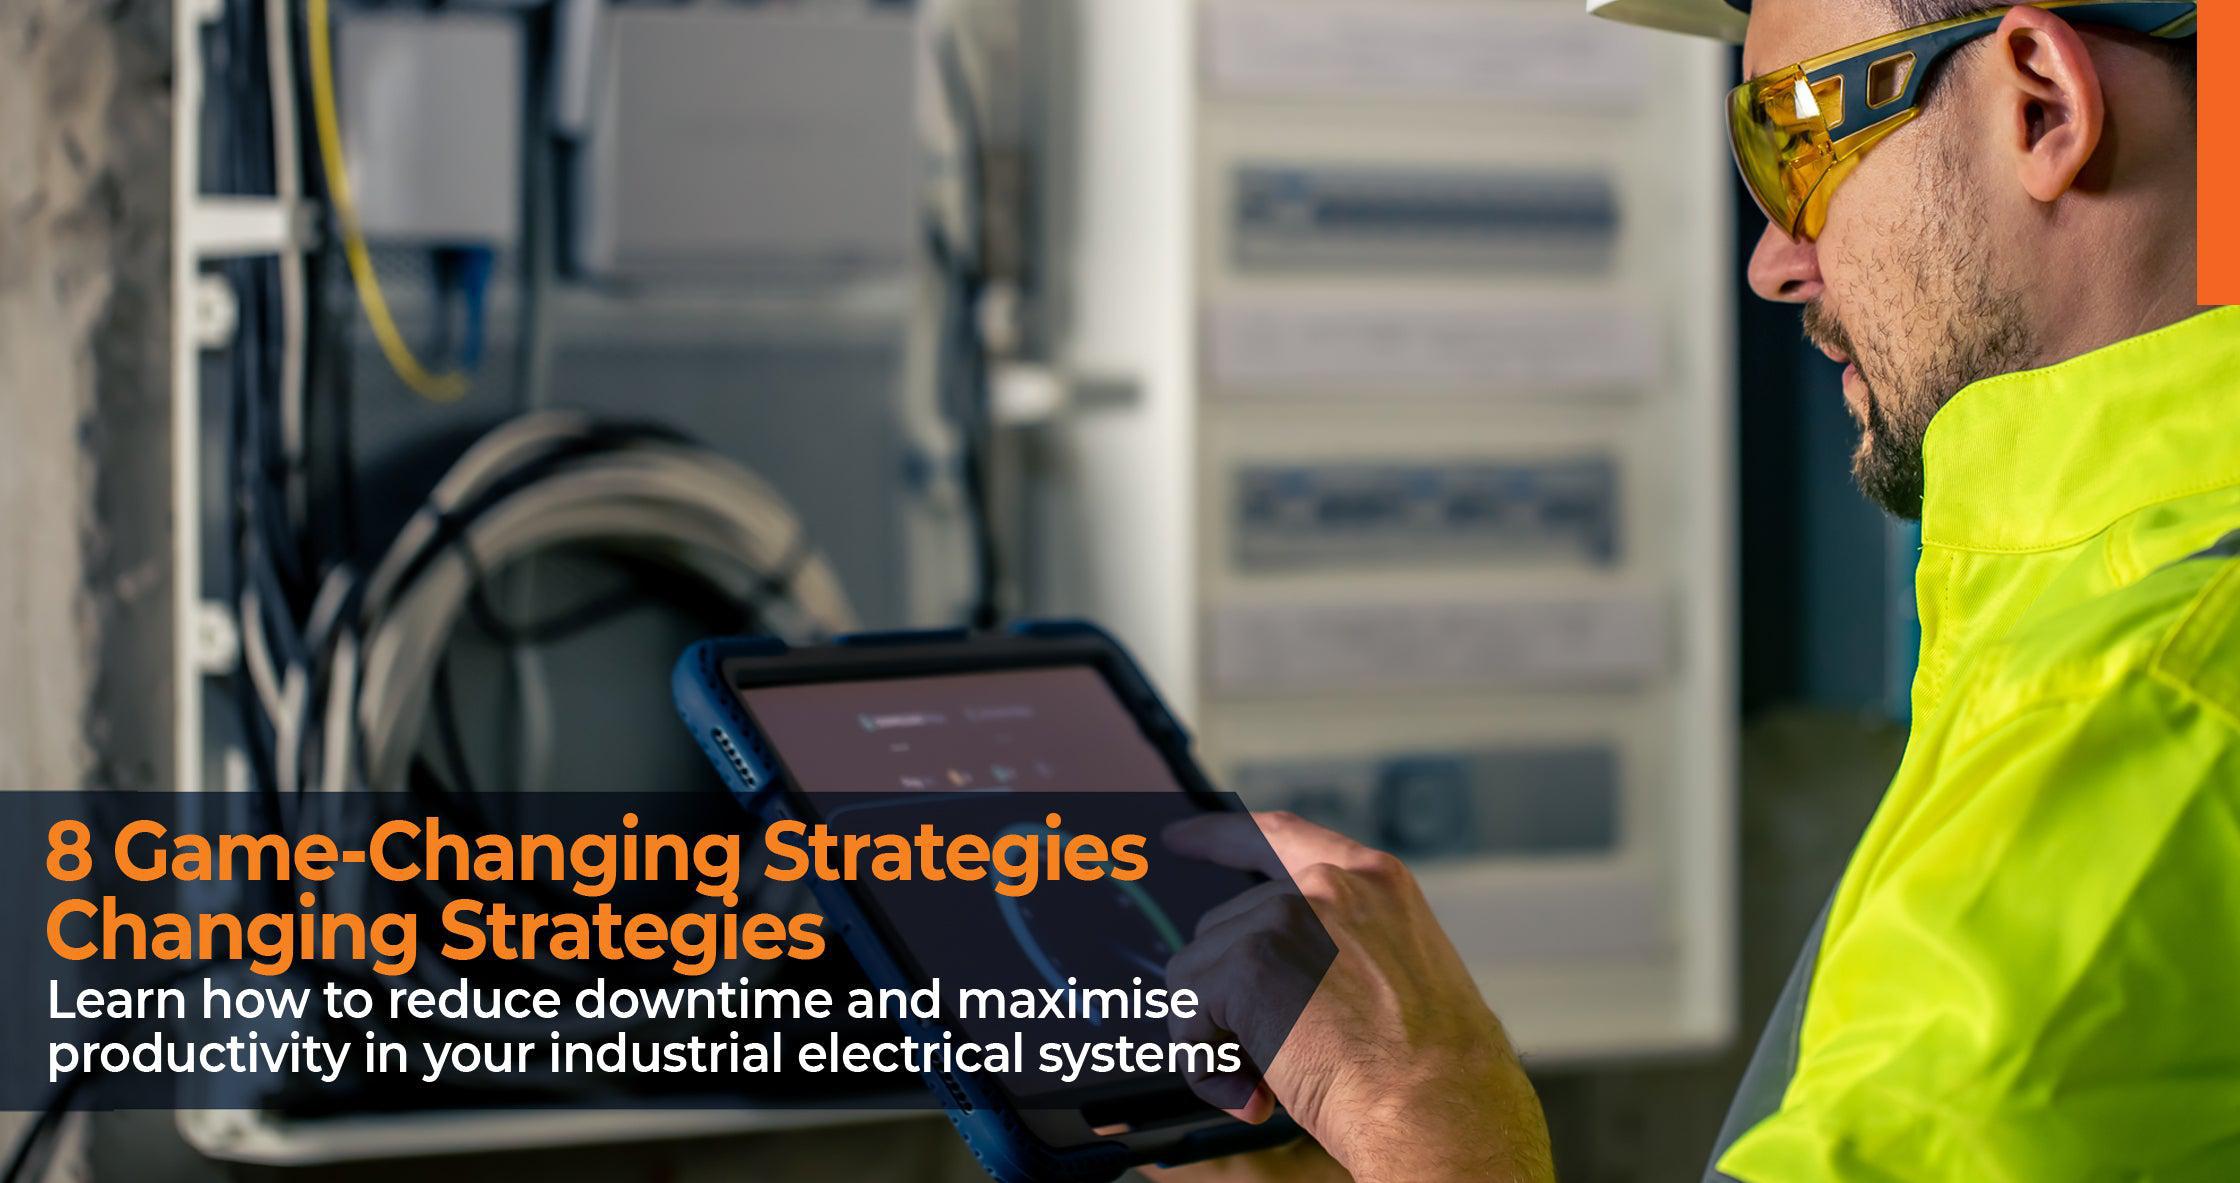 8 Game-Changing Strategies Learn how to reduce downtime and maximise productivity in your industrial electrical systems.